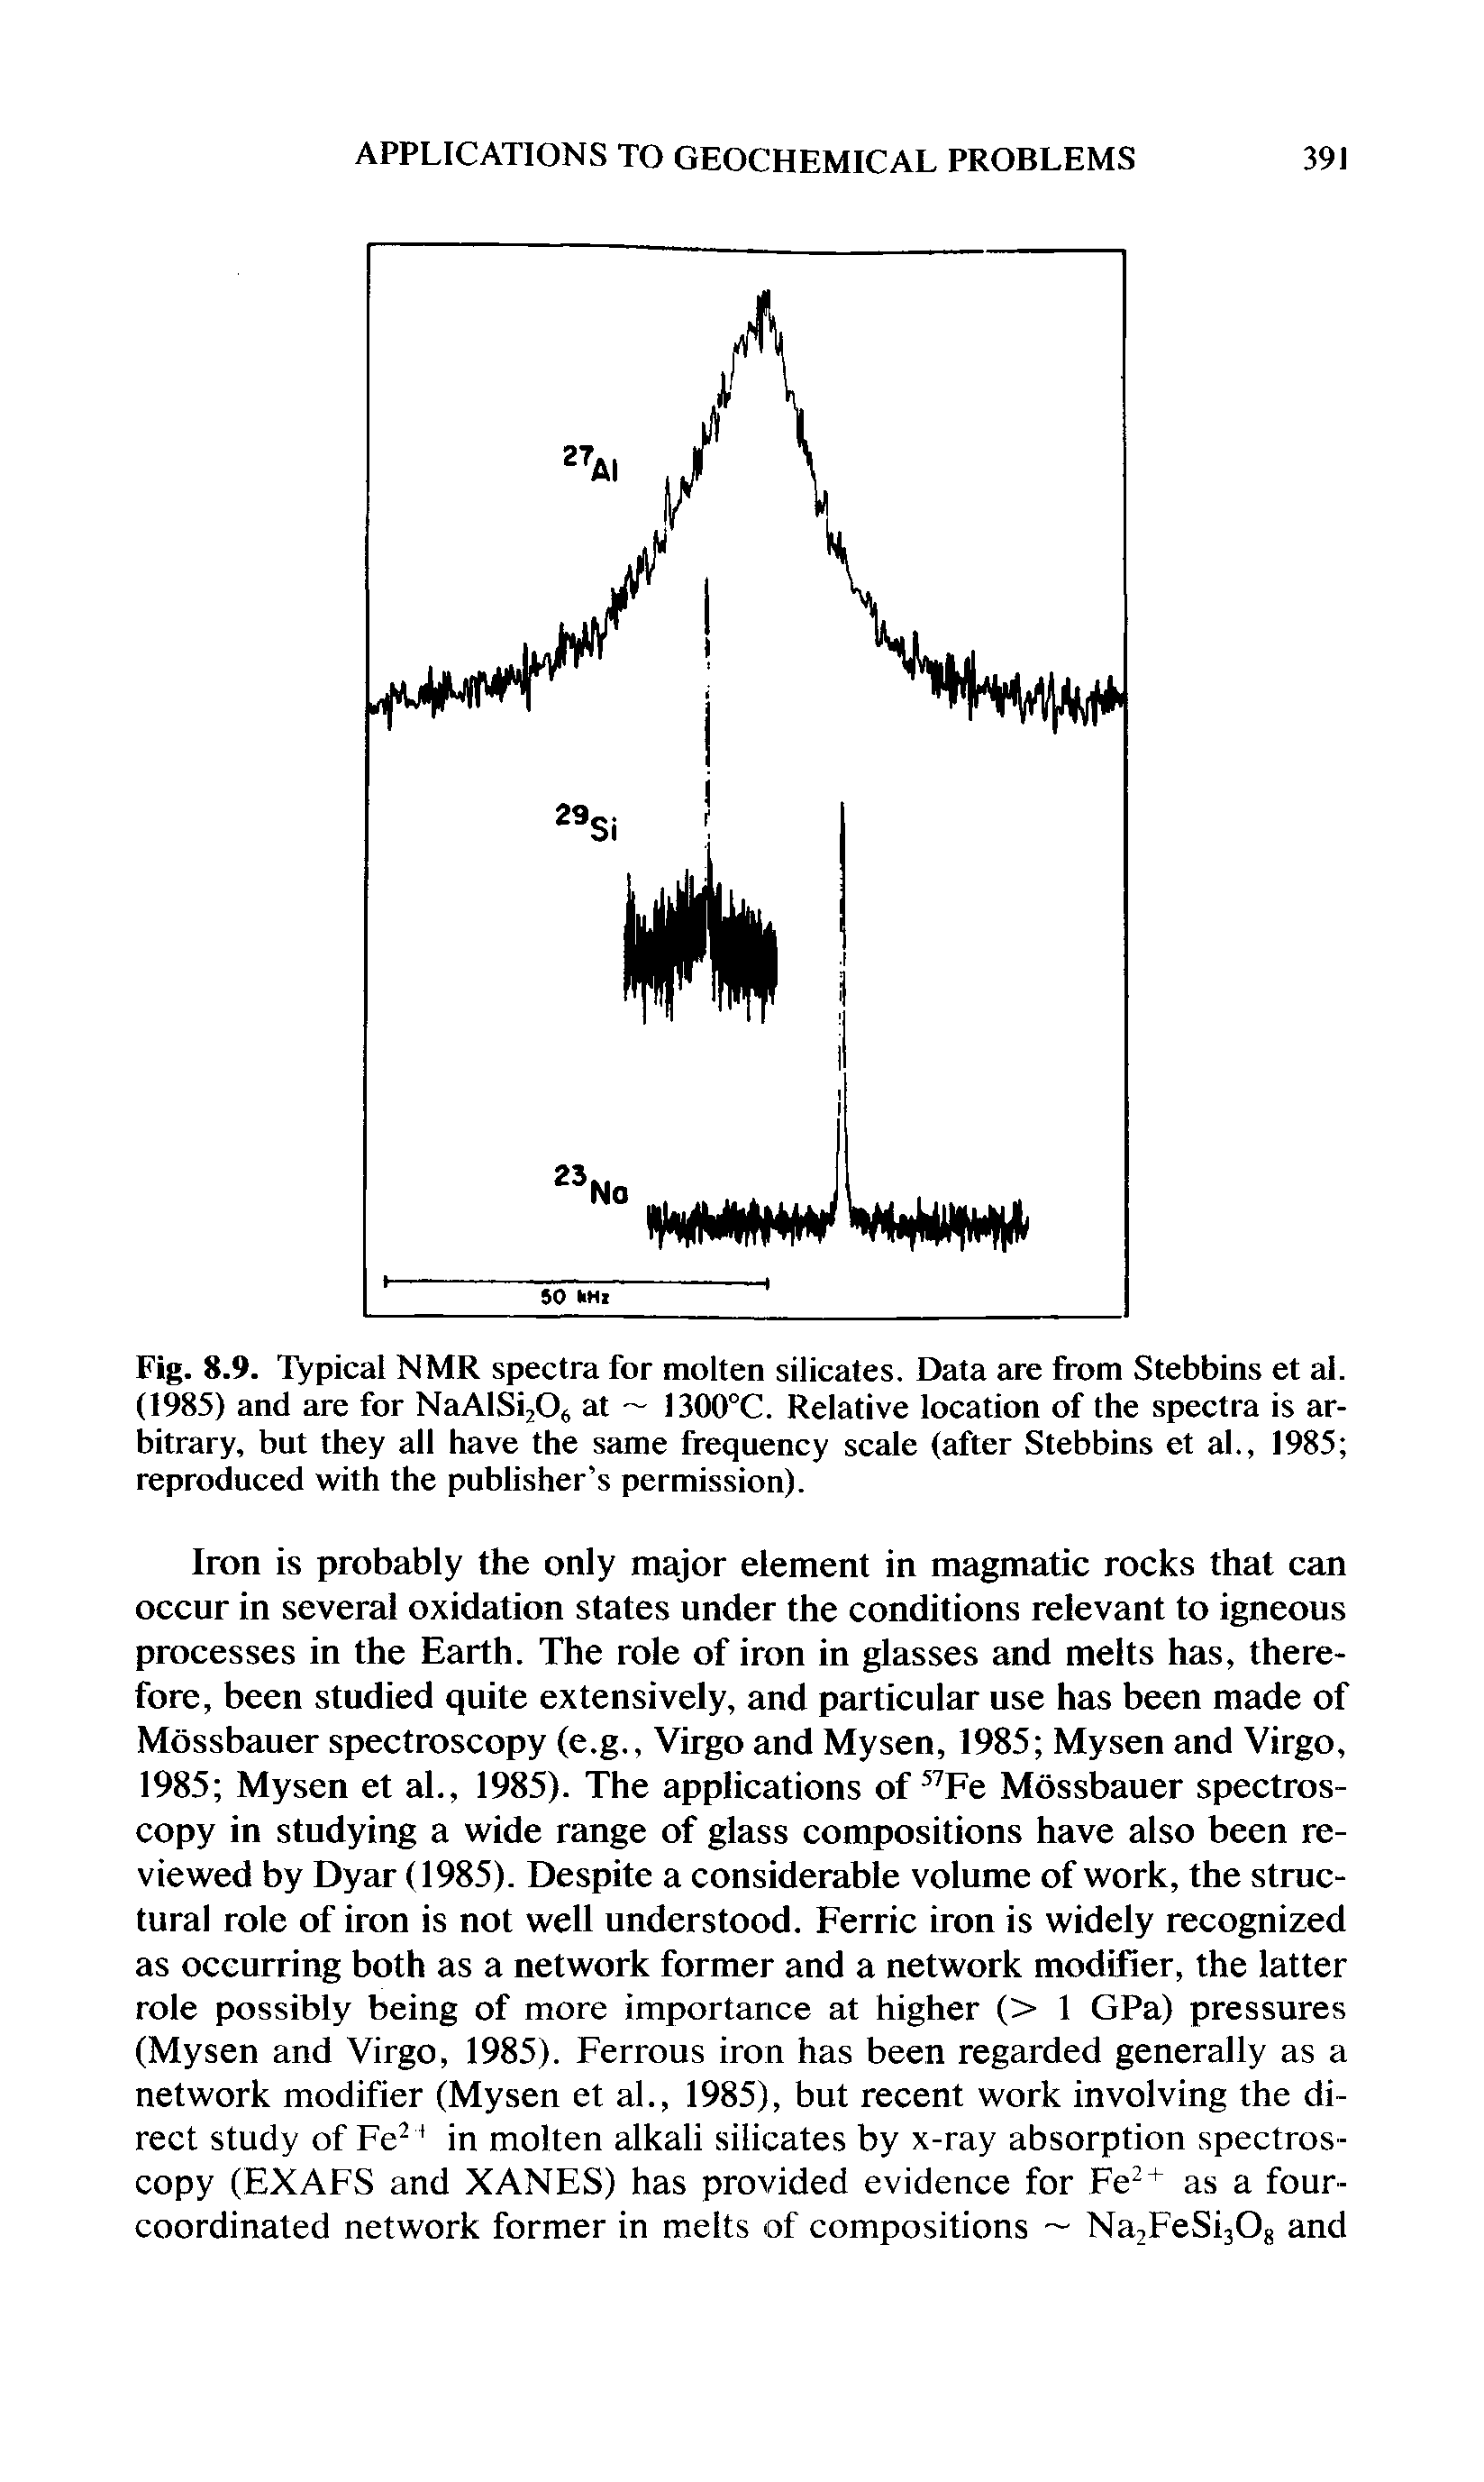 Fig. 8.9. Typical NMR spectra for molten silicates. Data are from Stebbins et al. (1985) and are for NaAlSijO at 1300°C. Relative location of the spectra is arbitrary, but they all have the same frequency scale (after Stebbins et al., 1985 reproduced with the publisher s permission).